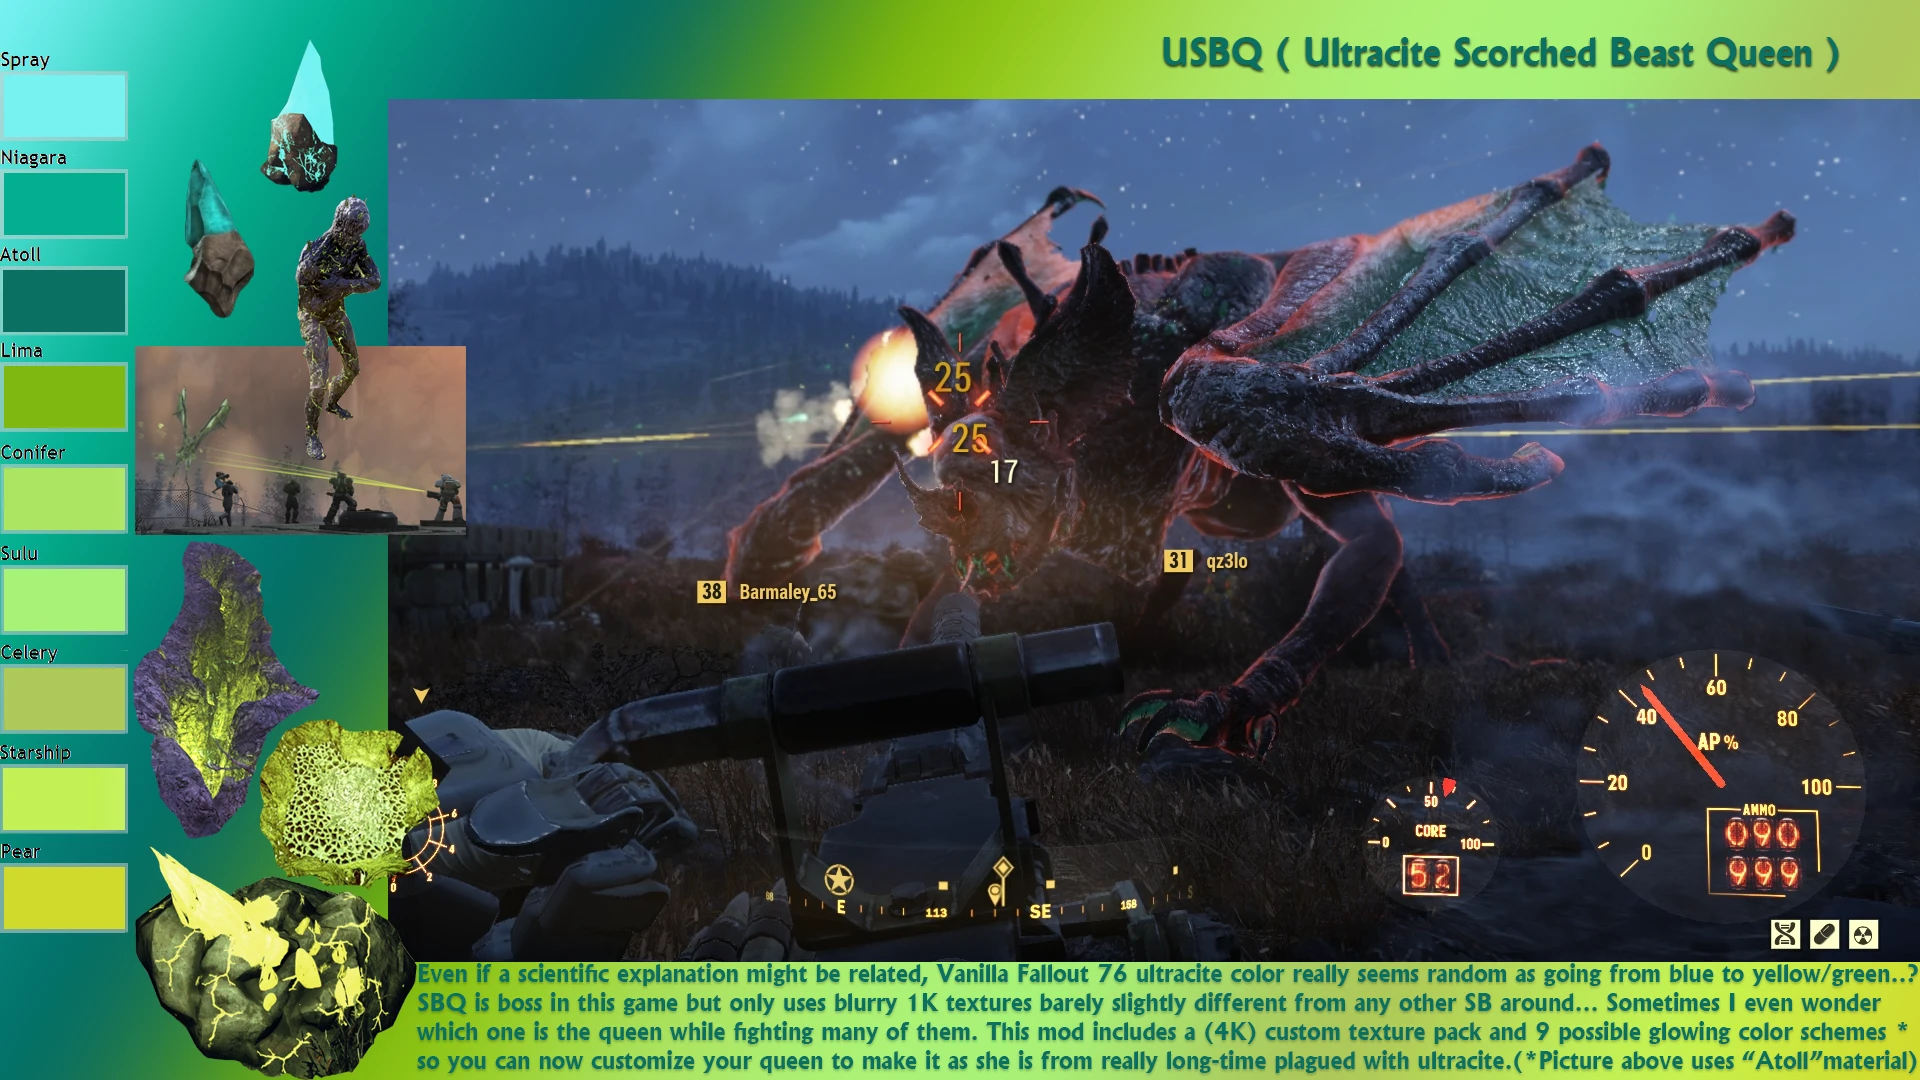 Invalidez Definitivo otoño USBQ - Ultracite Scorched Beast Queen at Fallout 76 Nexus - Mods and  community